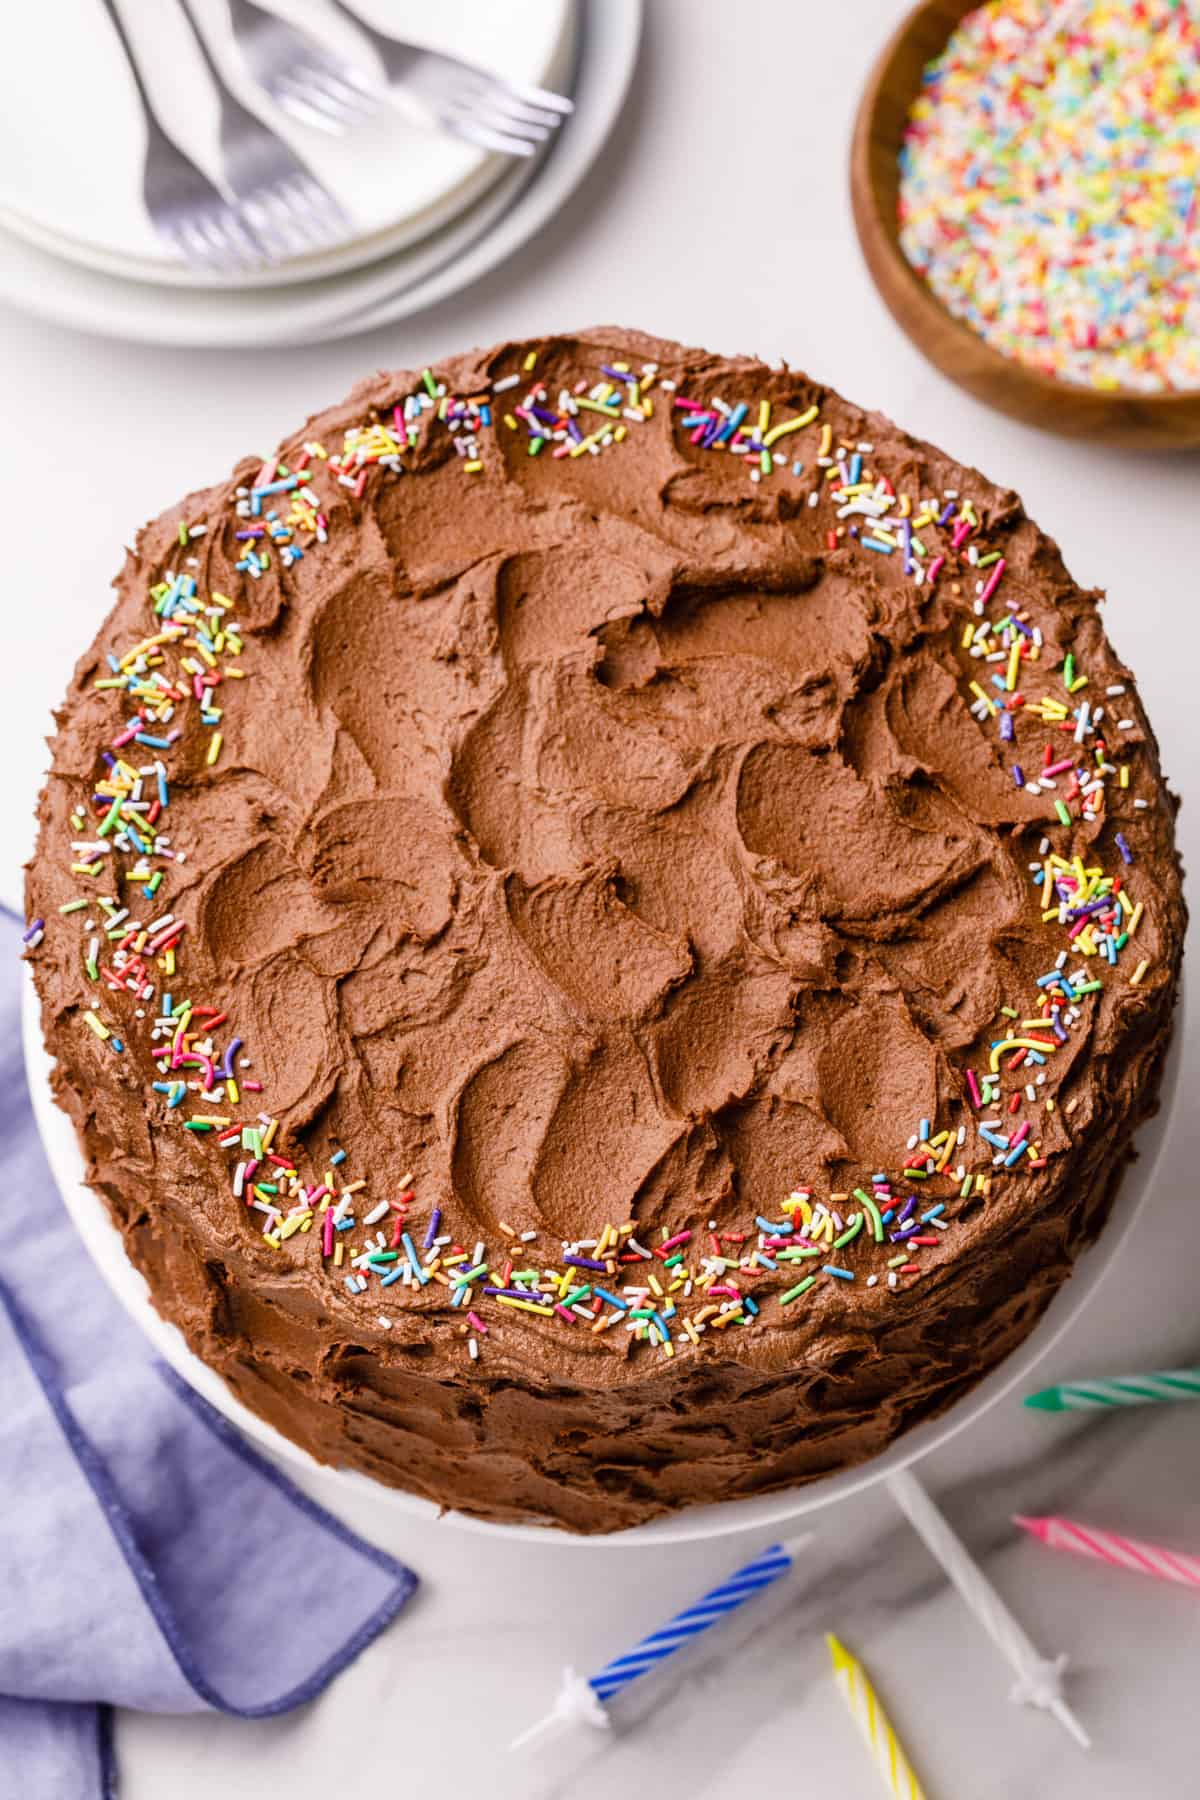 birthday cake (vanilla cake with chocolate frosting and sprinkles) on a cake stand